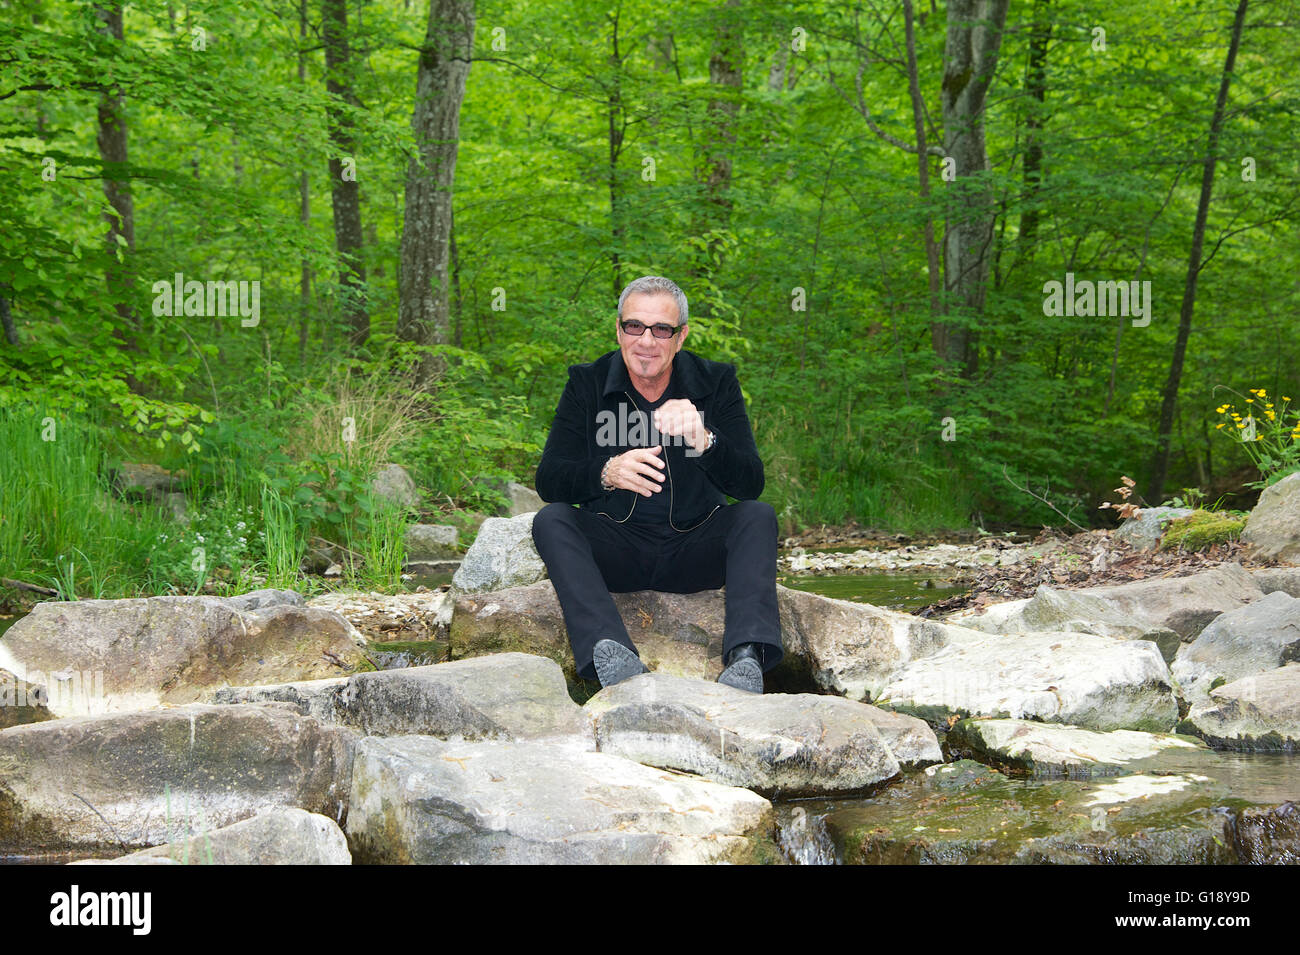 Seeshaupt, Germany. 10th May, 2016. dpa EXCLUSIVE - Tico Torres, drummer of Bon Jovi, sits between rocks after a presentation of his 'Rock Star Baby' fashion collection at the Lupaco Concept Store in Seeshaupt, Germany, 10 May 2016. Photo: Ursula Dueren/dpa/Alamy Live News Stock Photo